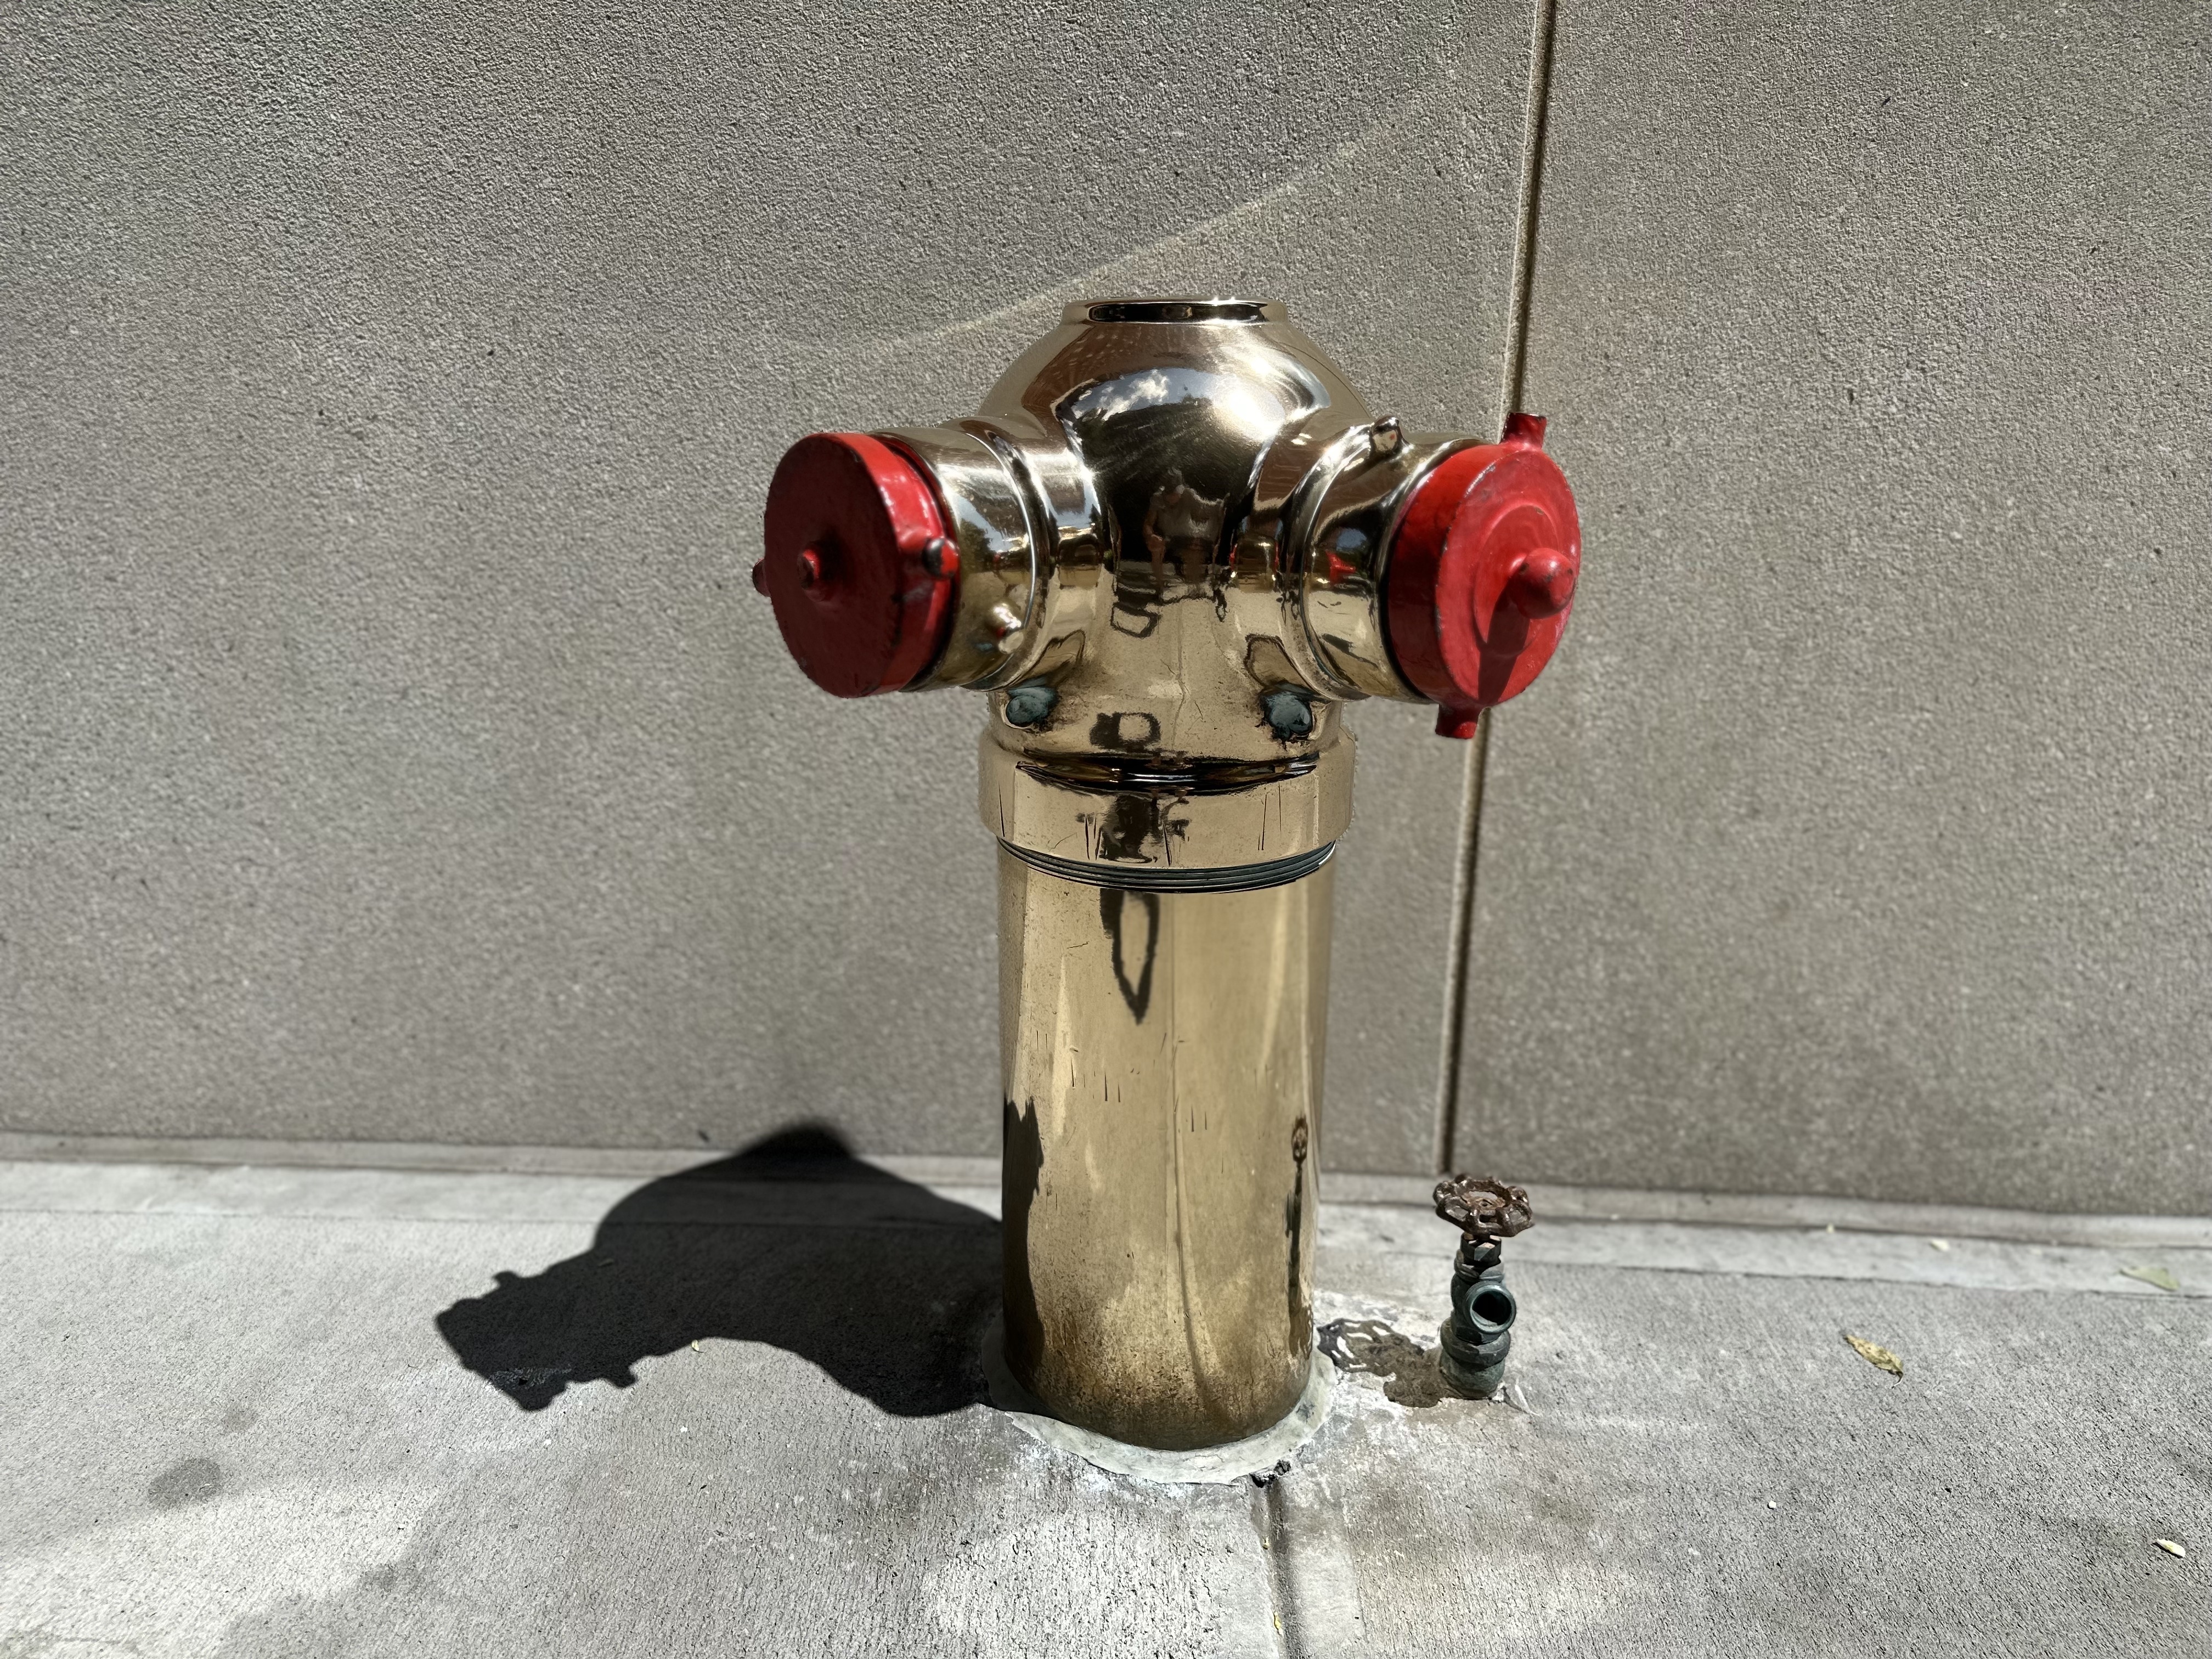 Standpipe Fire Hydrant on E90th Street. A sign of wealth?